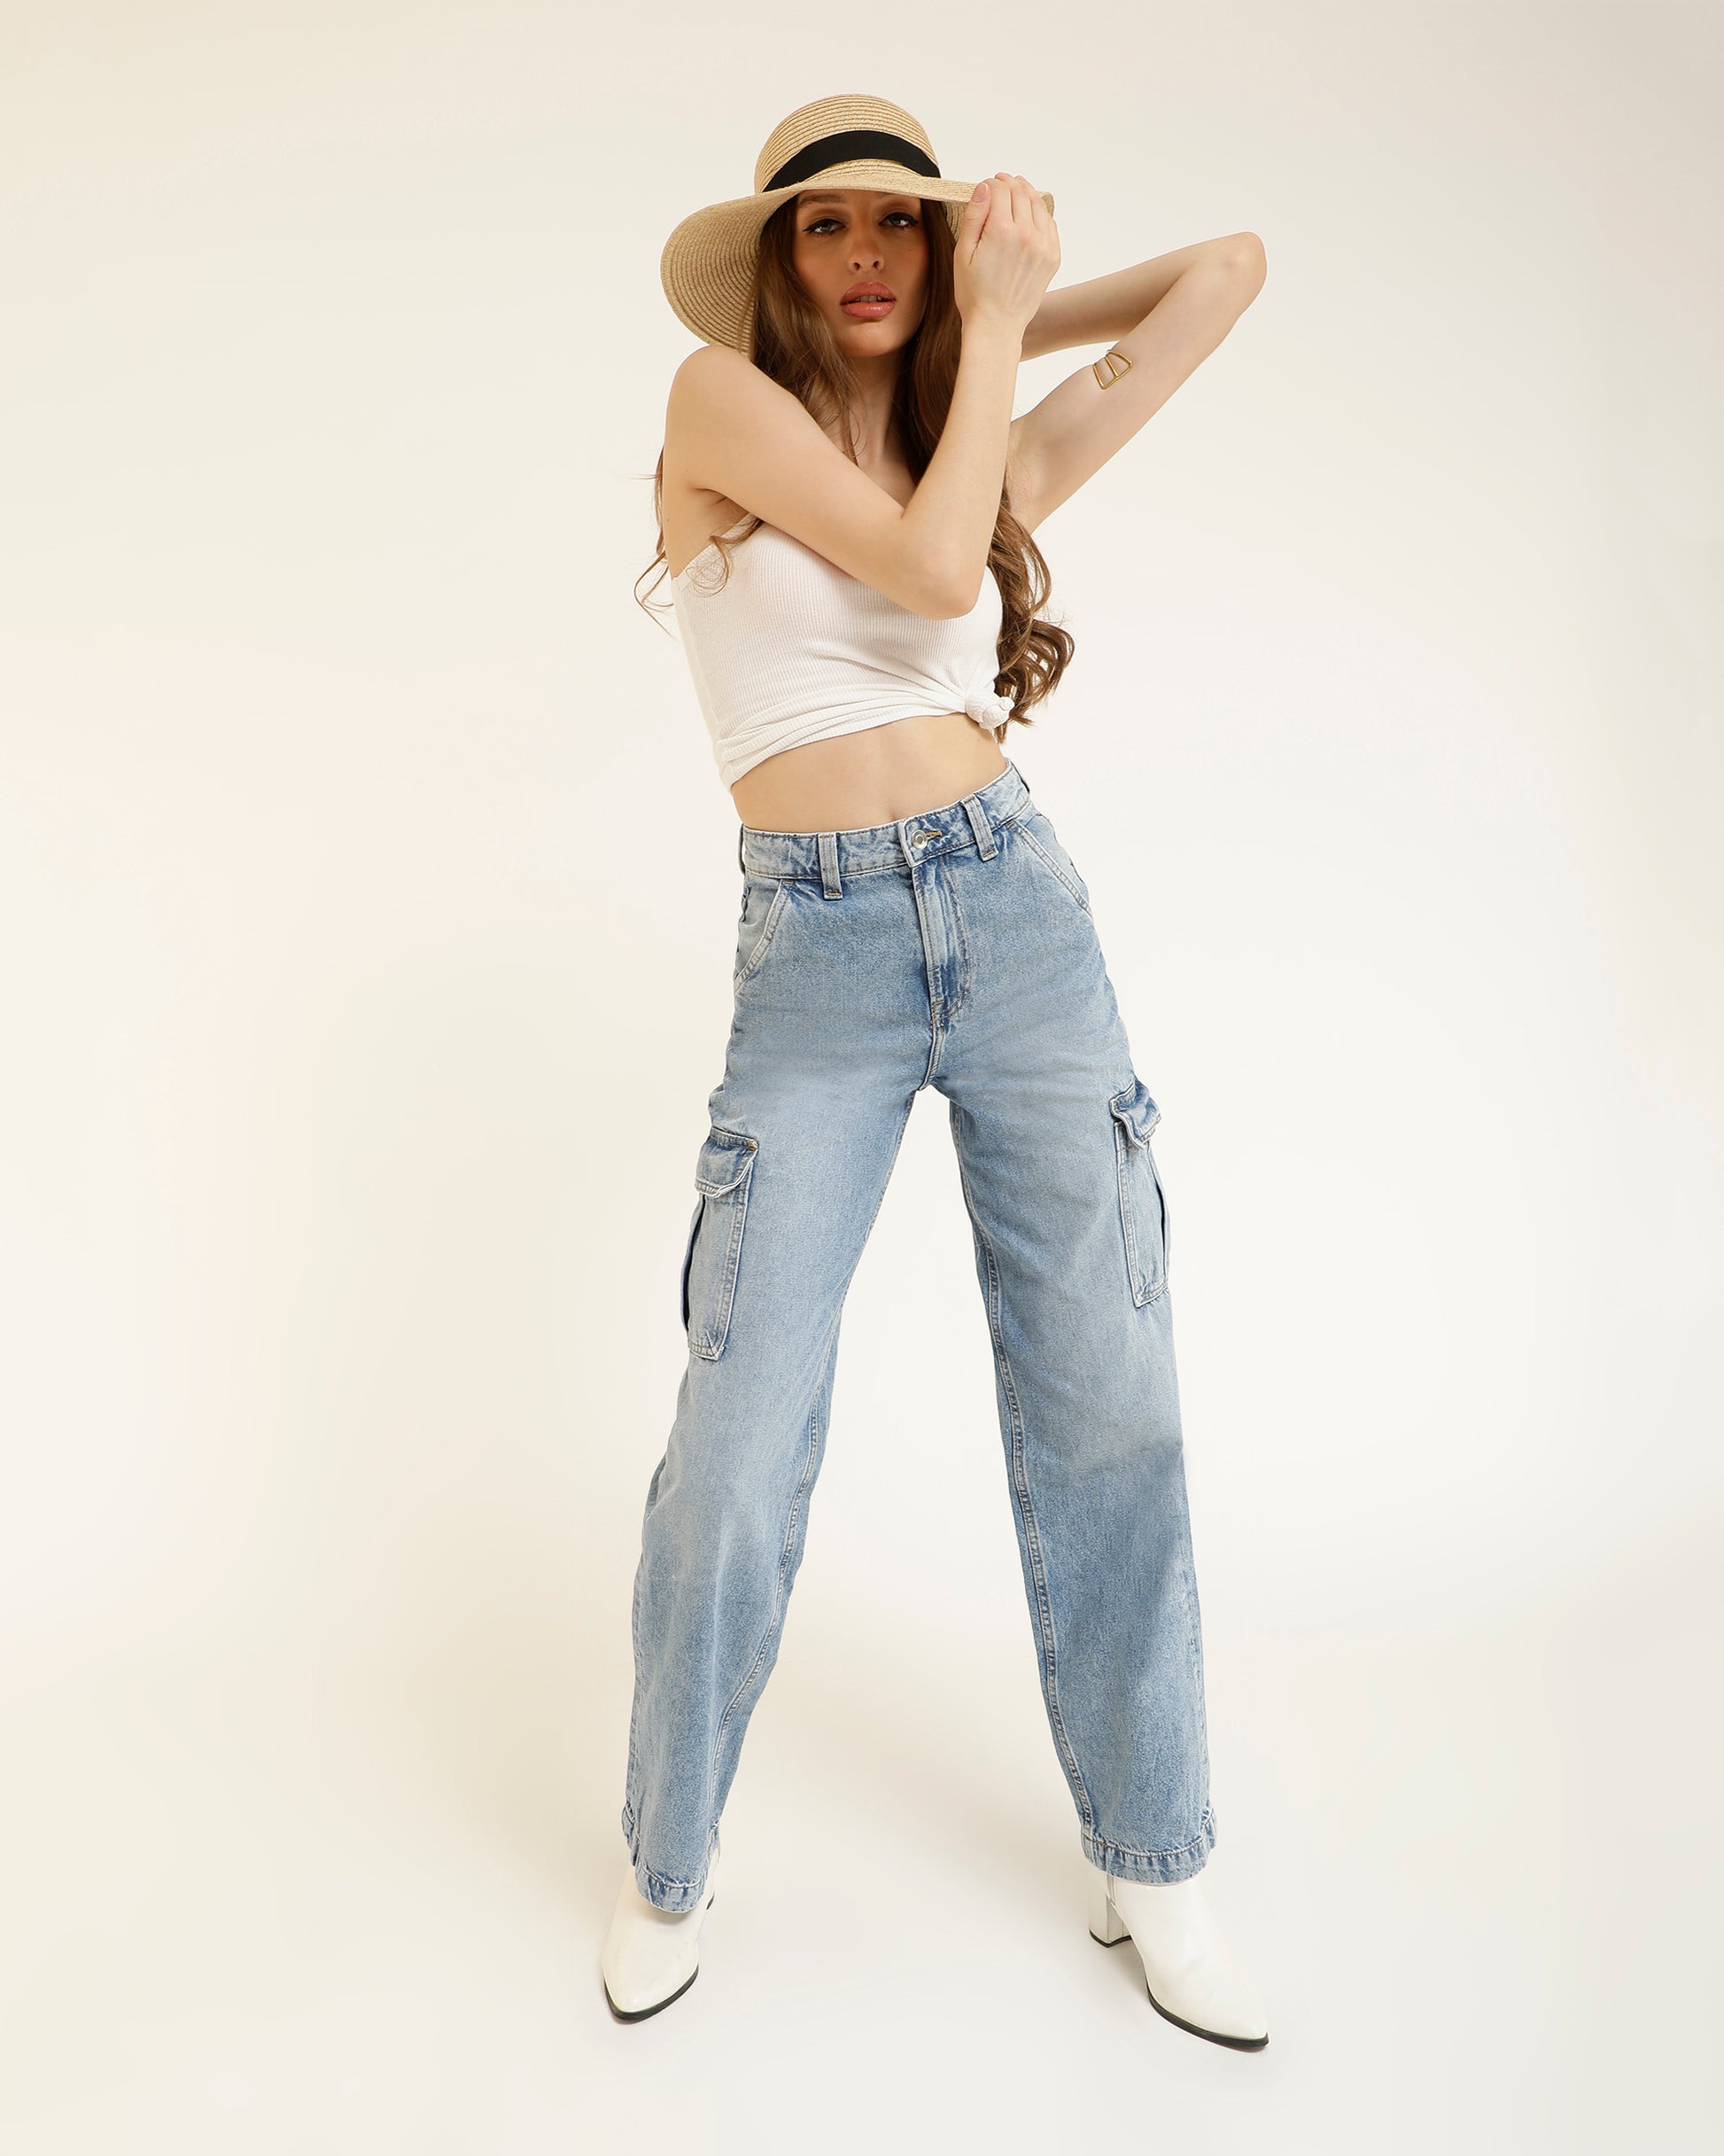 CARGO JEANS,baggy, bottomwear, cargos, denim, full length, high rise, high waist, icy blue, jeans, light blue, straight fit, washed jeans, wide leg, Length - Full length Waist - High-rise waist Fit - Baggy fit Color - Icy blue No. of Pockets - 6 Material - Denim Length - 43" Closure - Zip &amp; button Detail - Washed effect